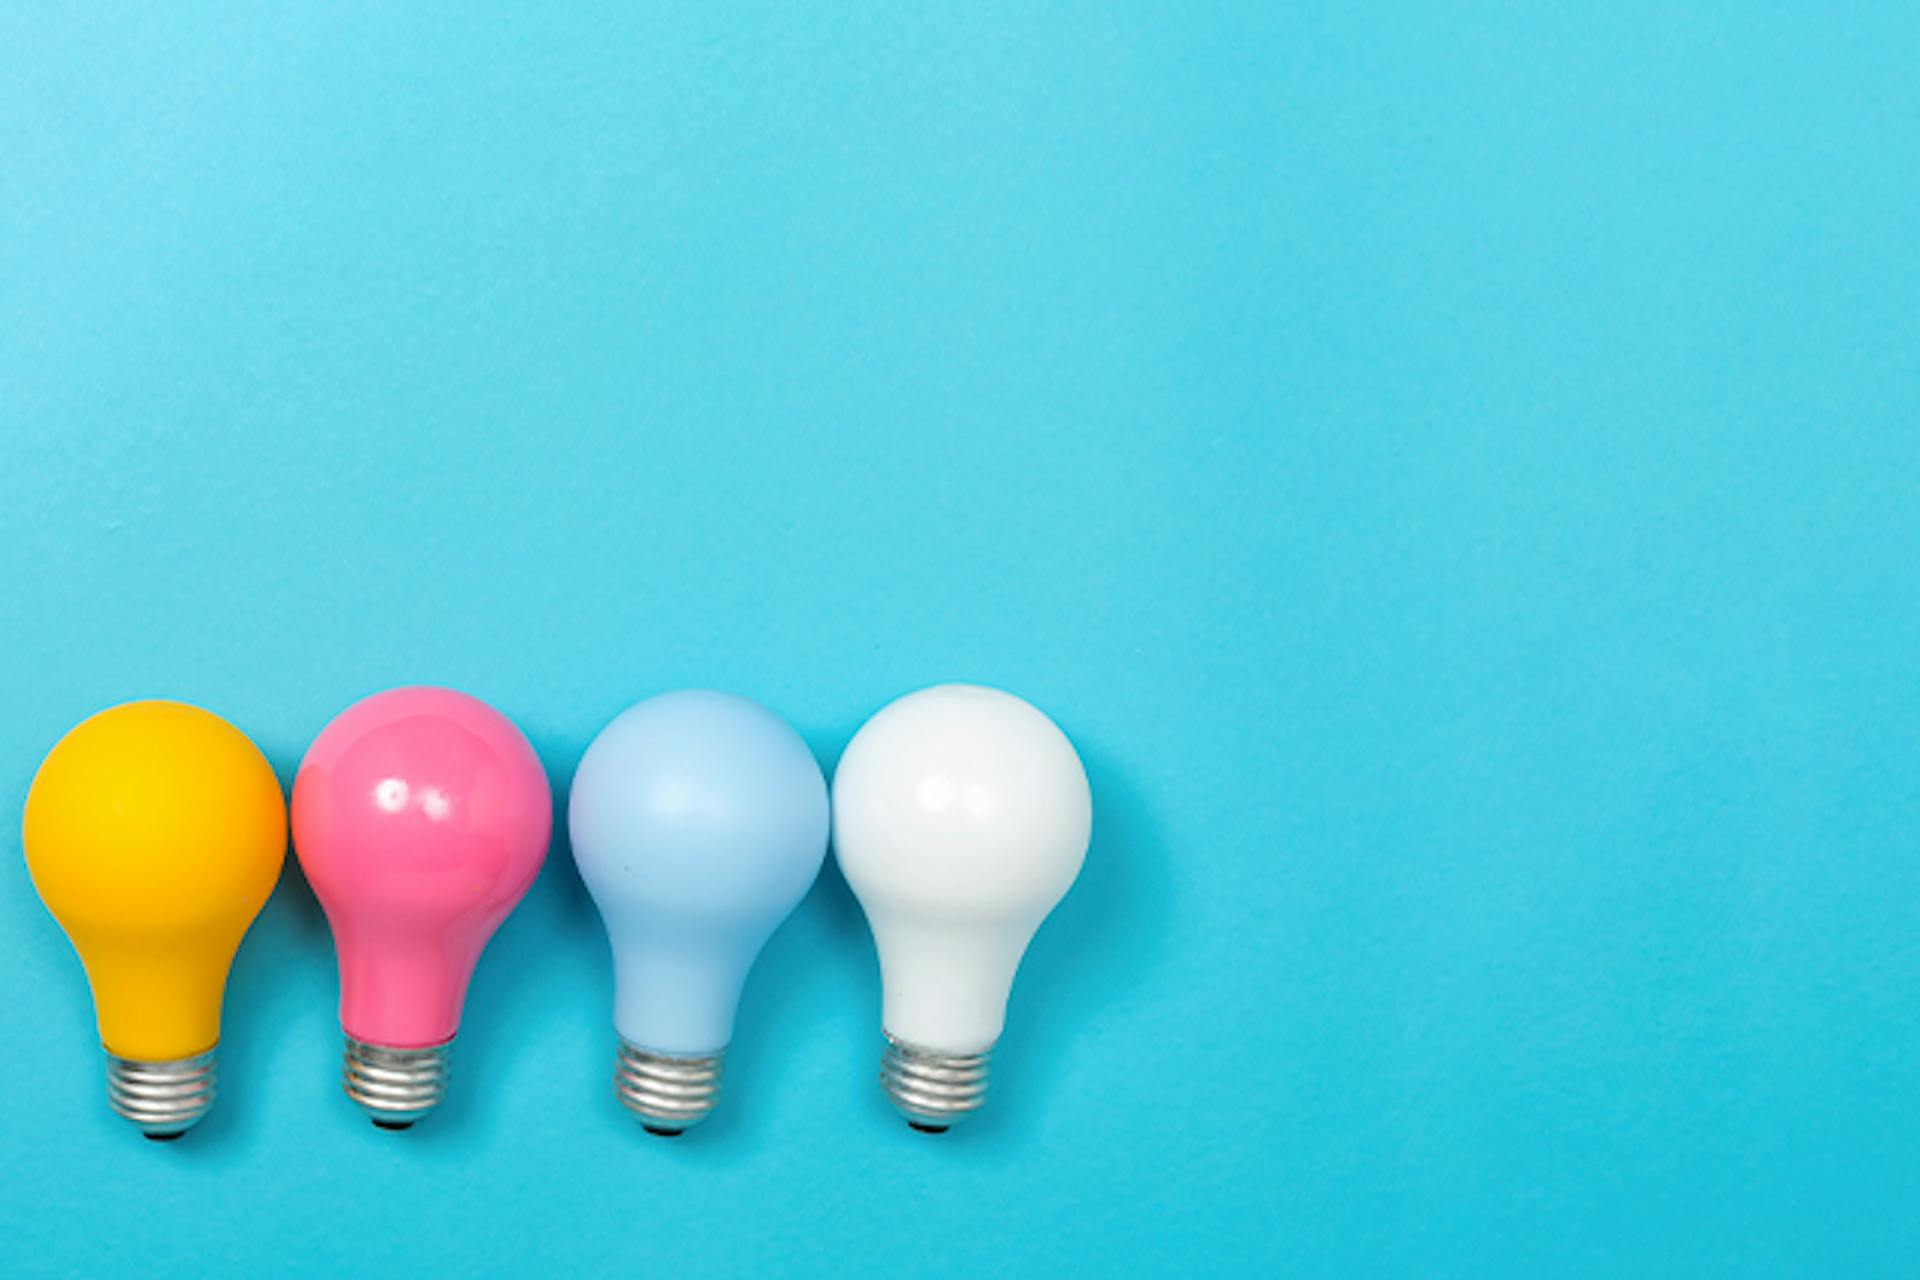 Yellow, pink, blue, and white lightbulbs laid side-by-side against blue background